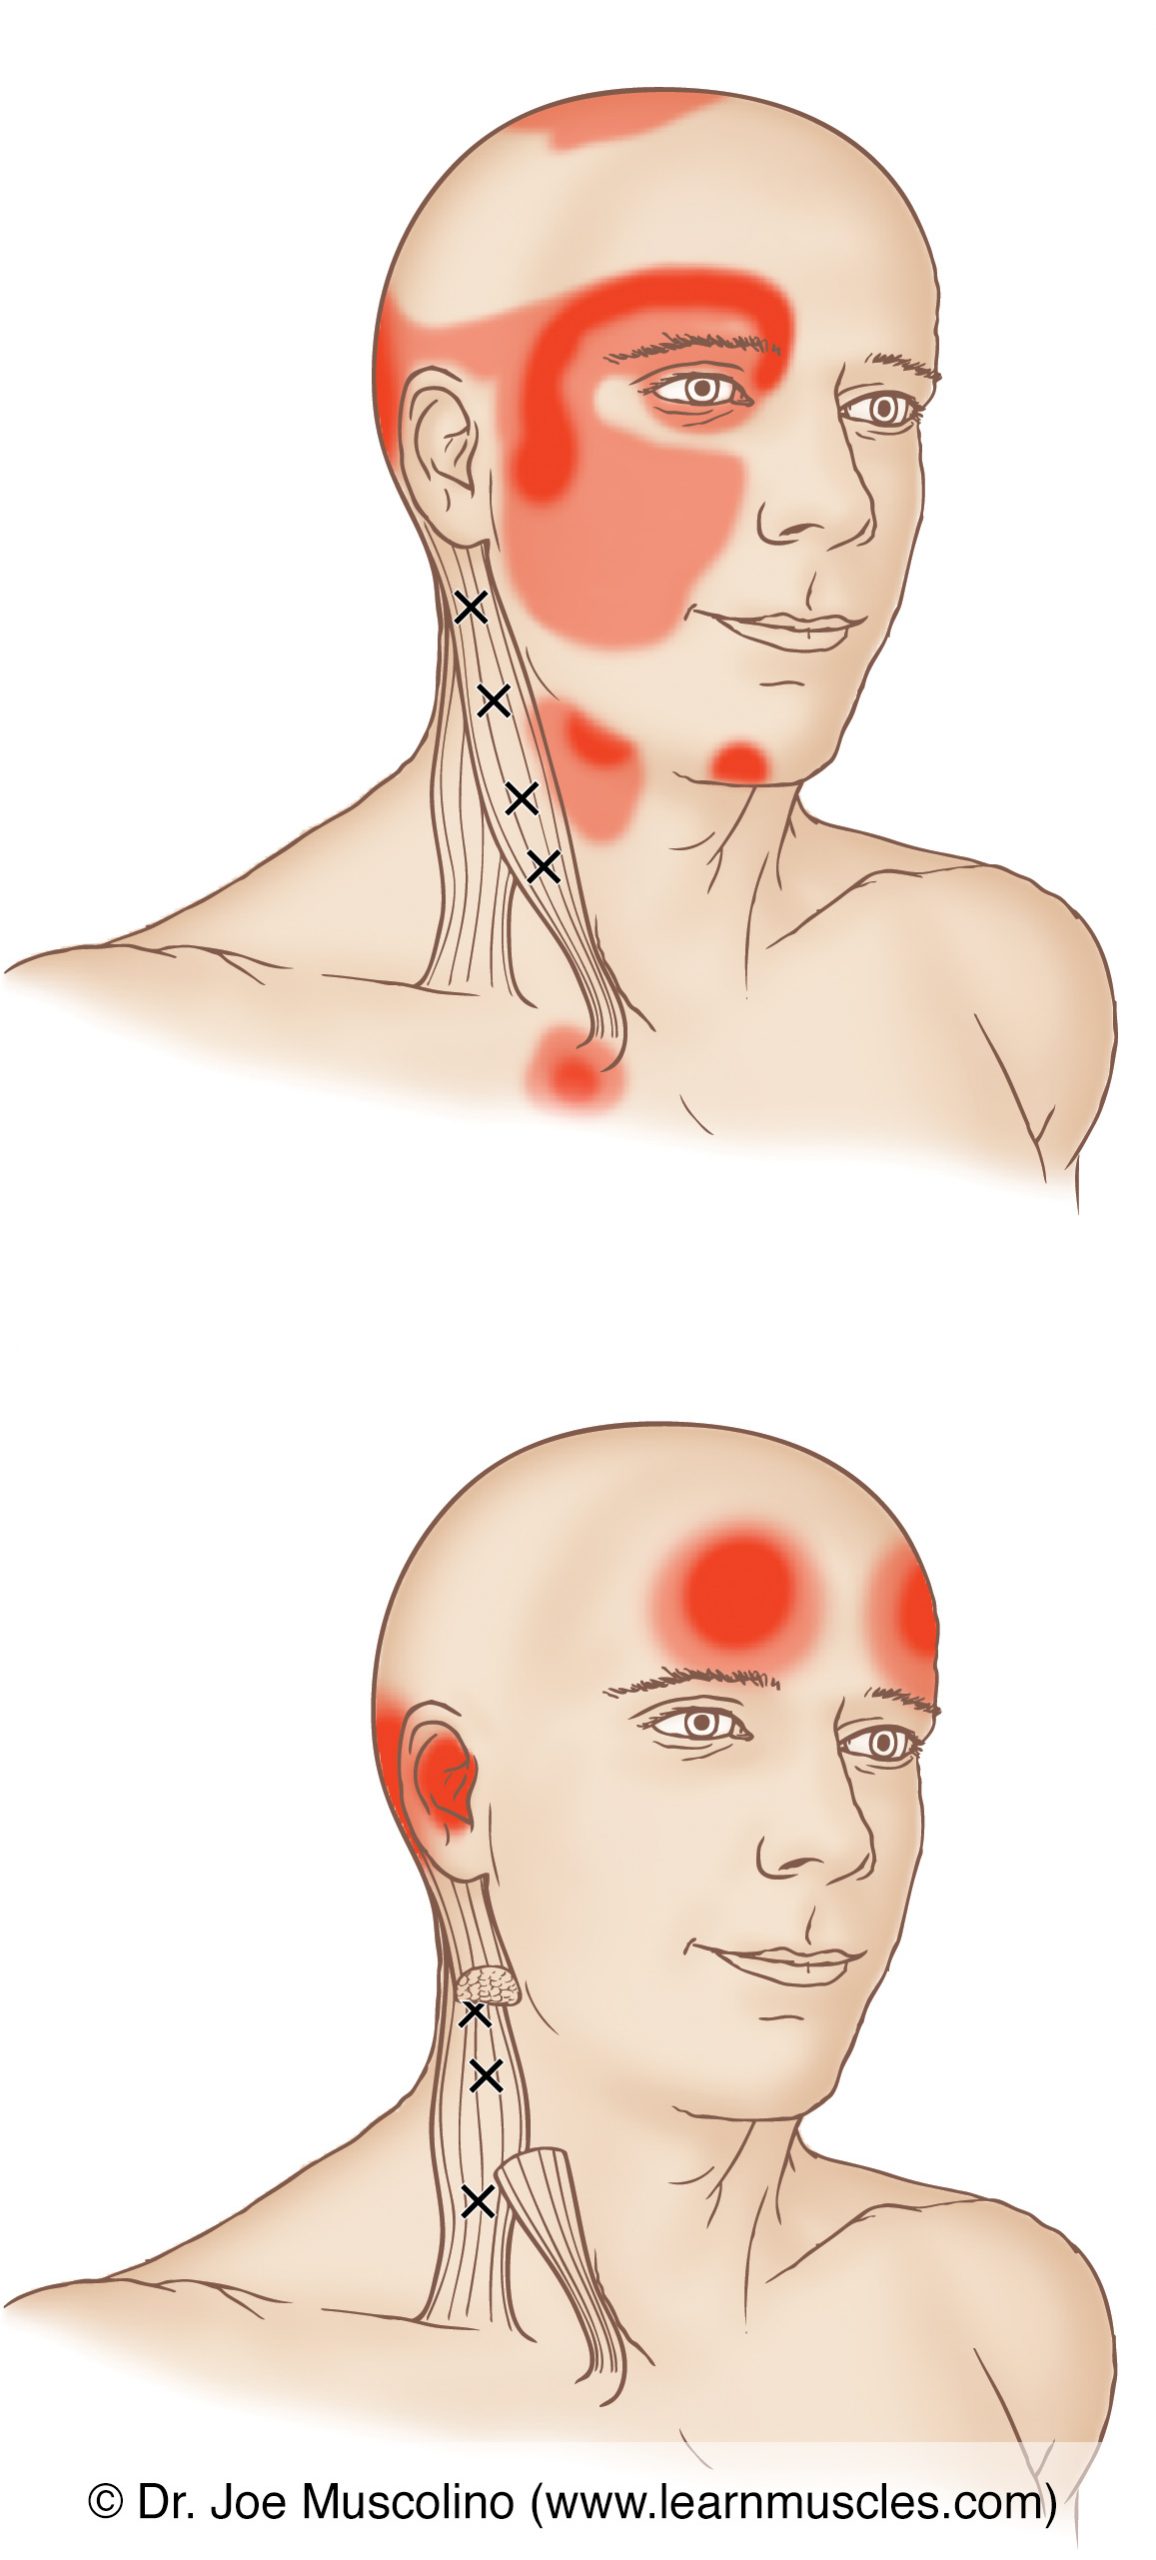 Sternocleidomastoid Scm Trigger Points Learn Muscles 1407